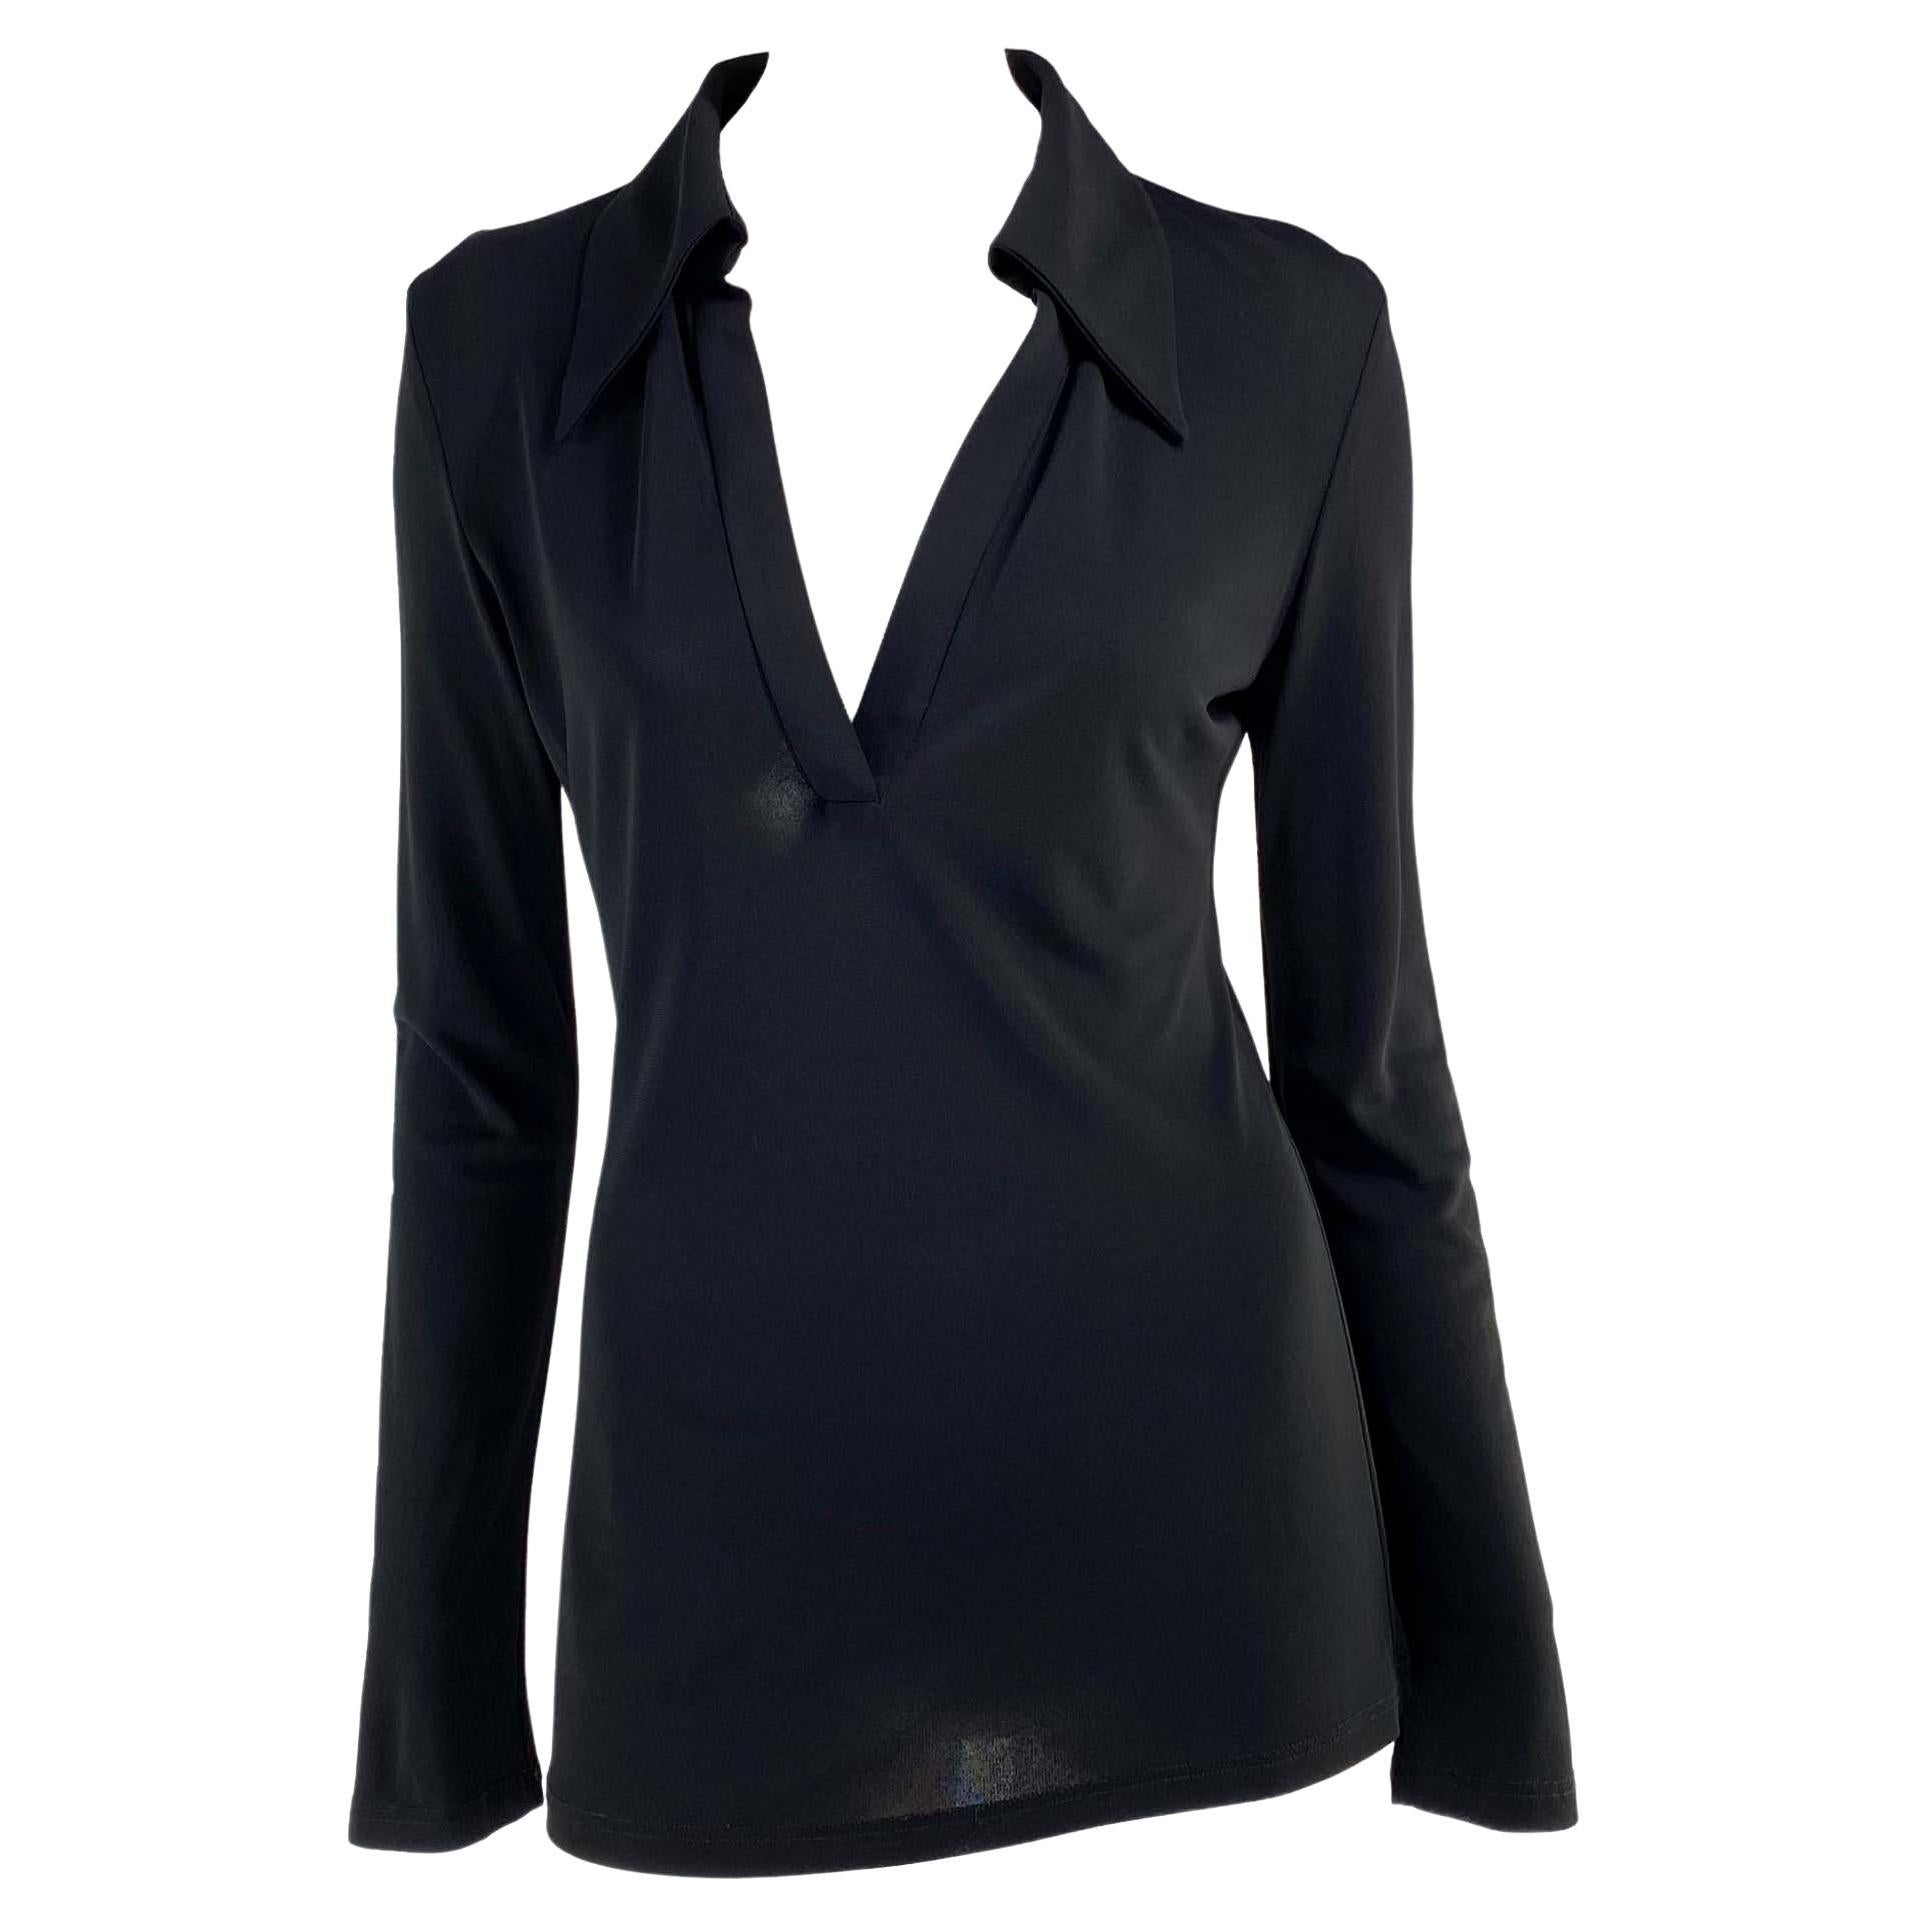 Presenting a collared v-neck tunic top, designed by Tom Ford. This top has long sleeves, a prominent collar, and a deep v-neckline. Not your average top, this shirt was designed for the Spring/Summer 1996 collection and is the perfect chic elevation